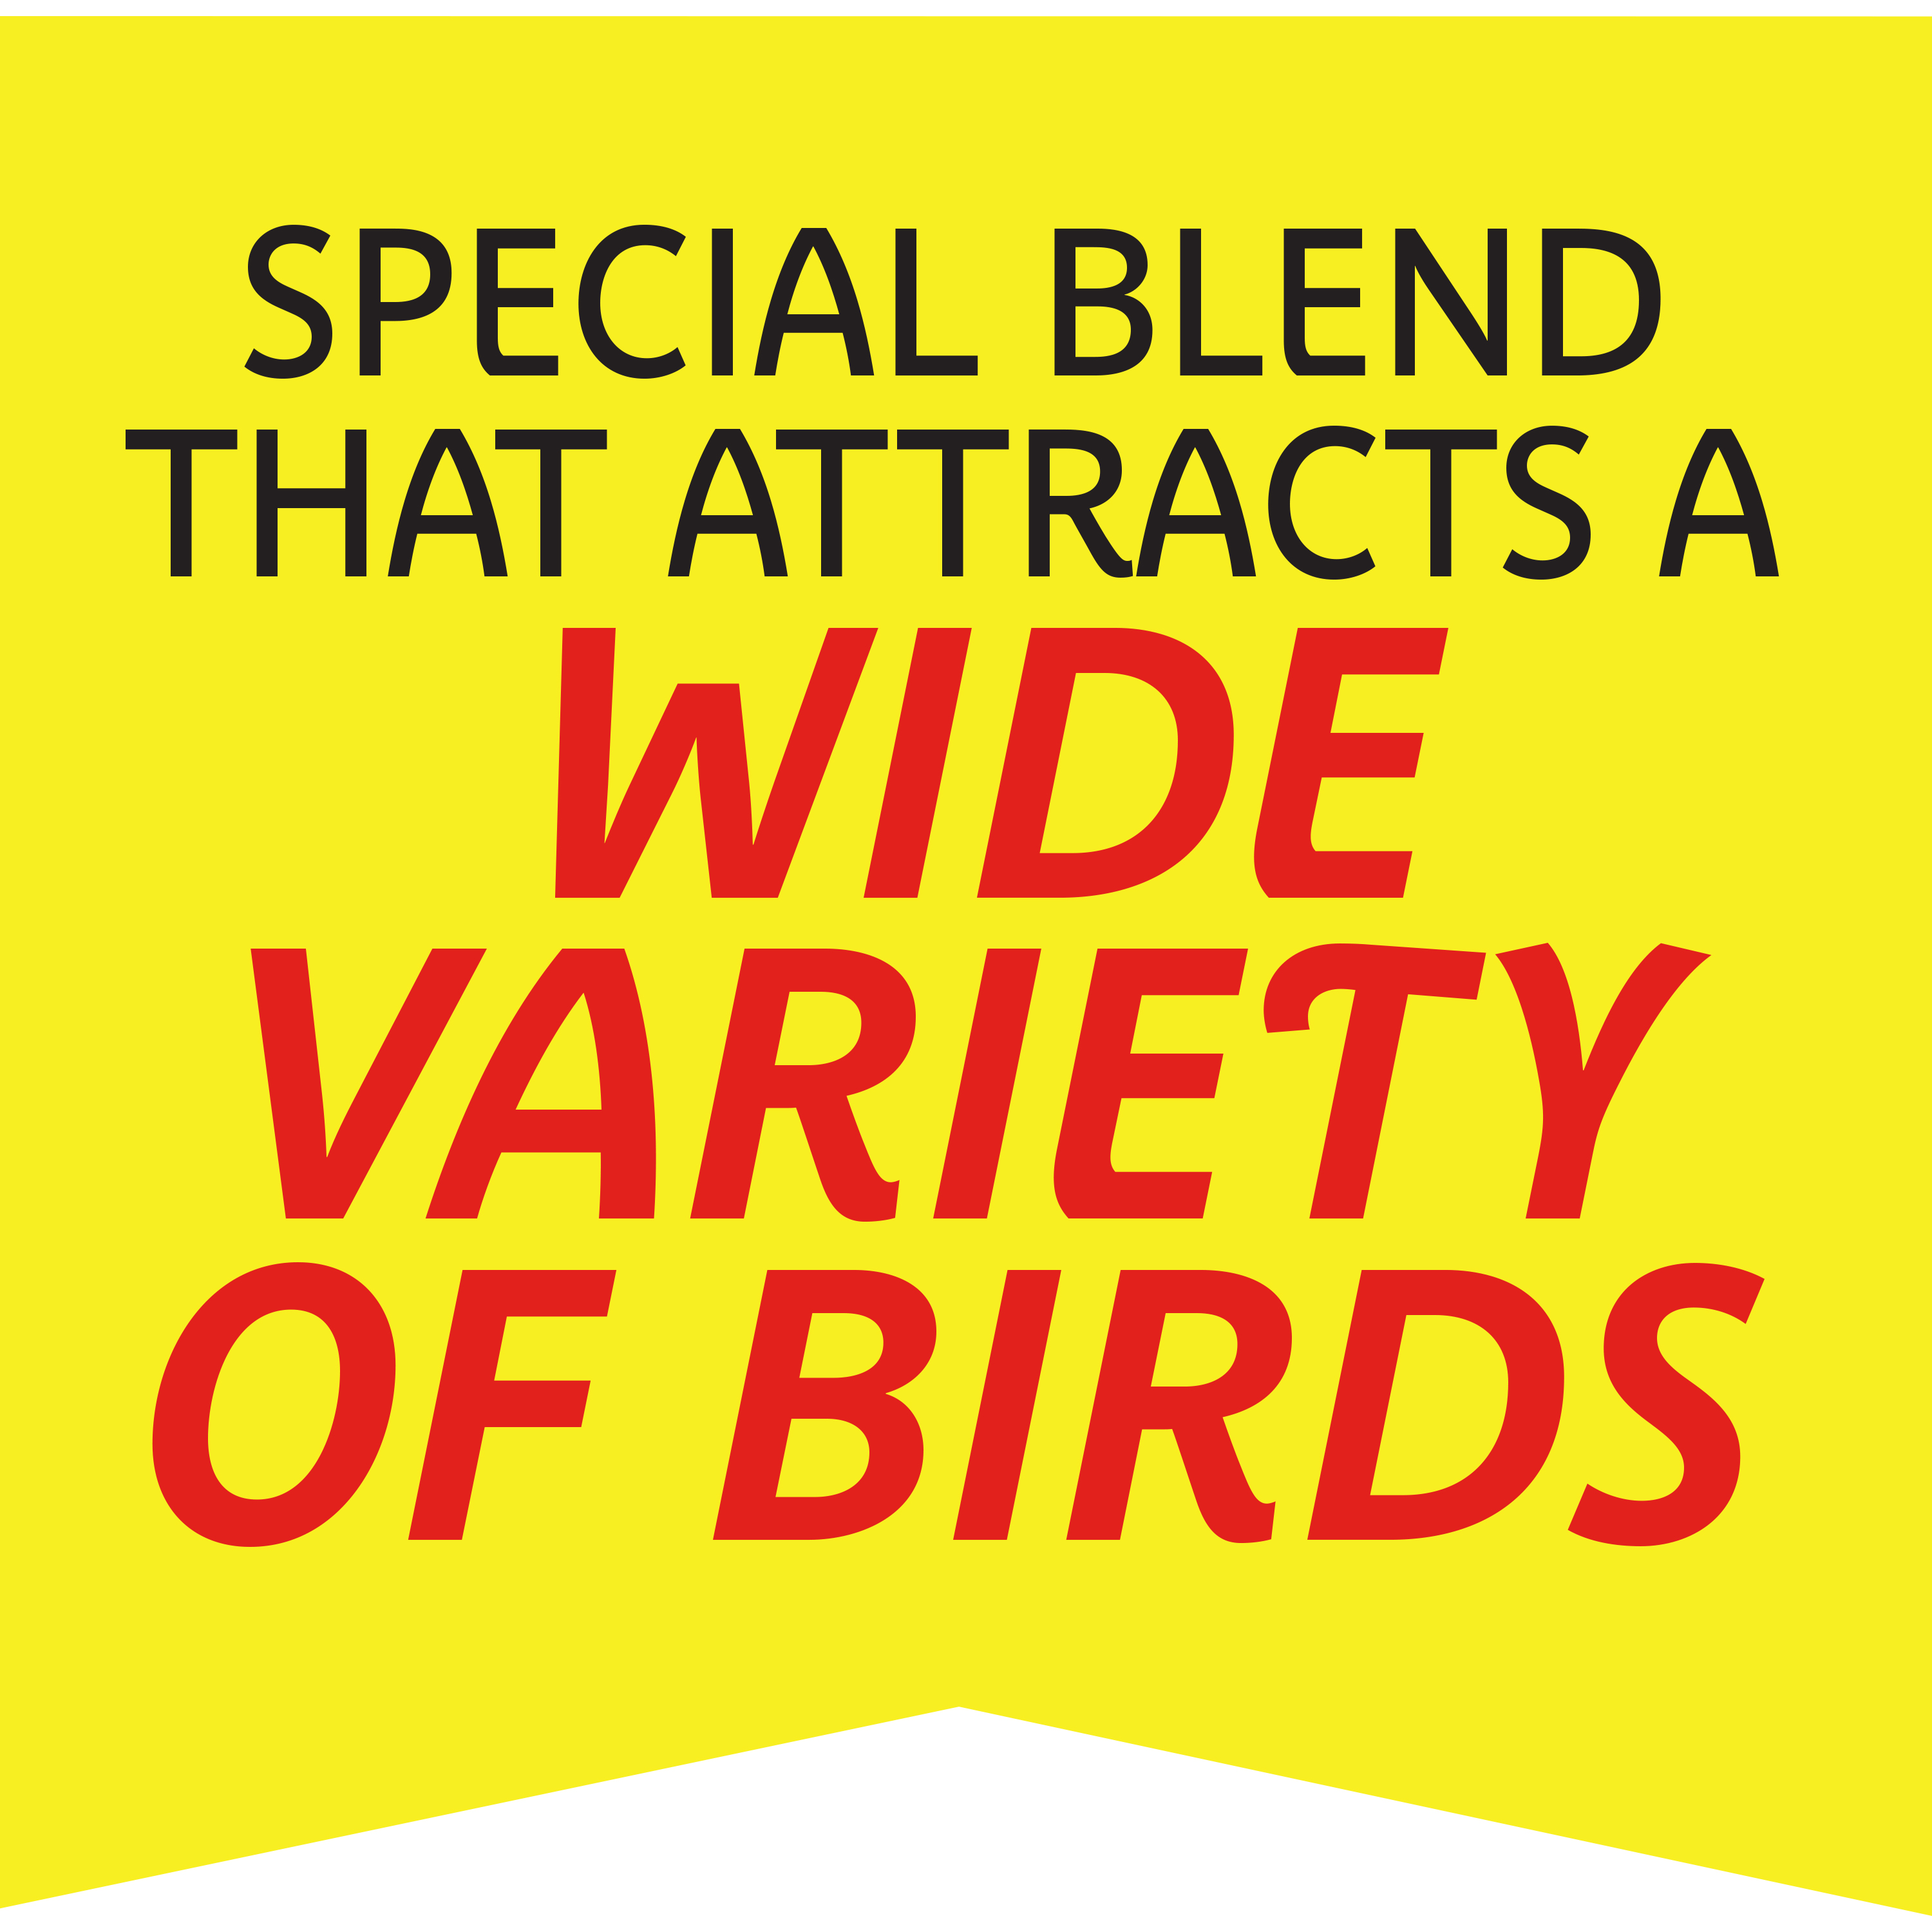 Pennington Select Birder's Blend, Wild Bird Seed and Feed, 14 lb. Bag, 1 Pack, Dry - image 5 of 9